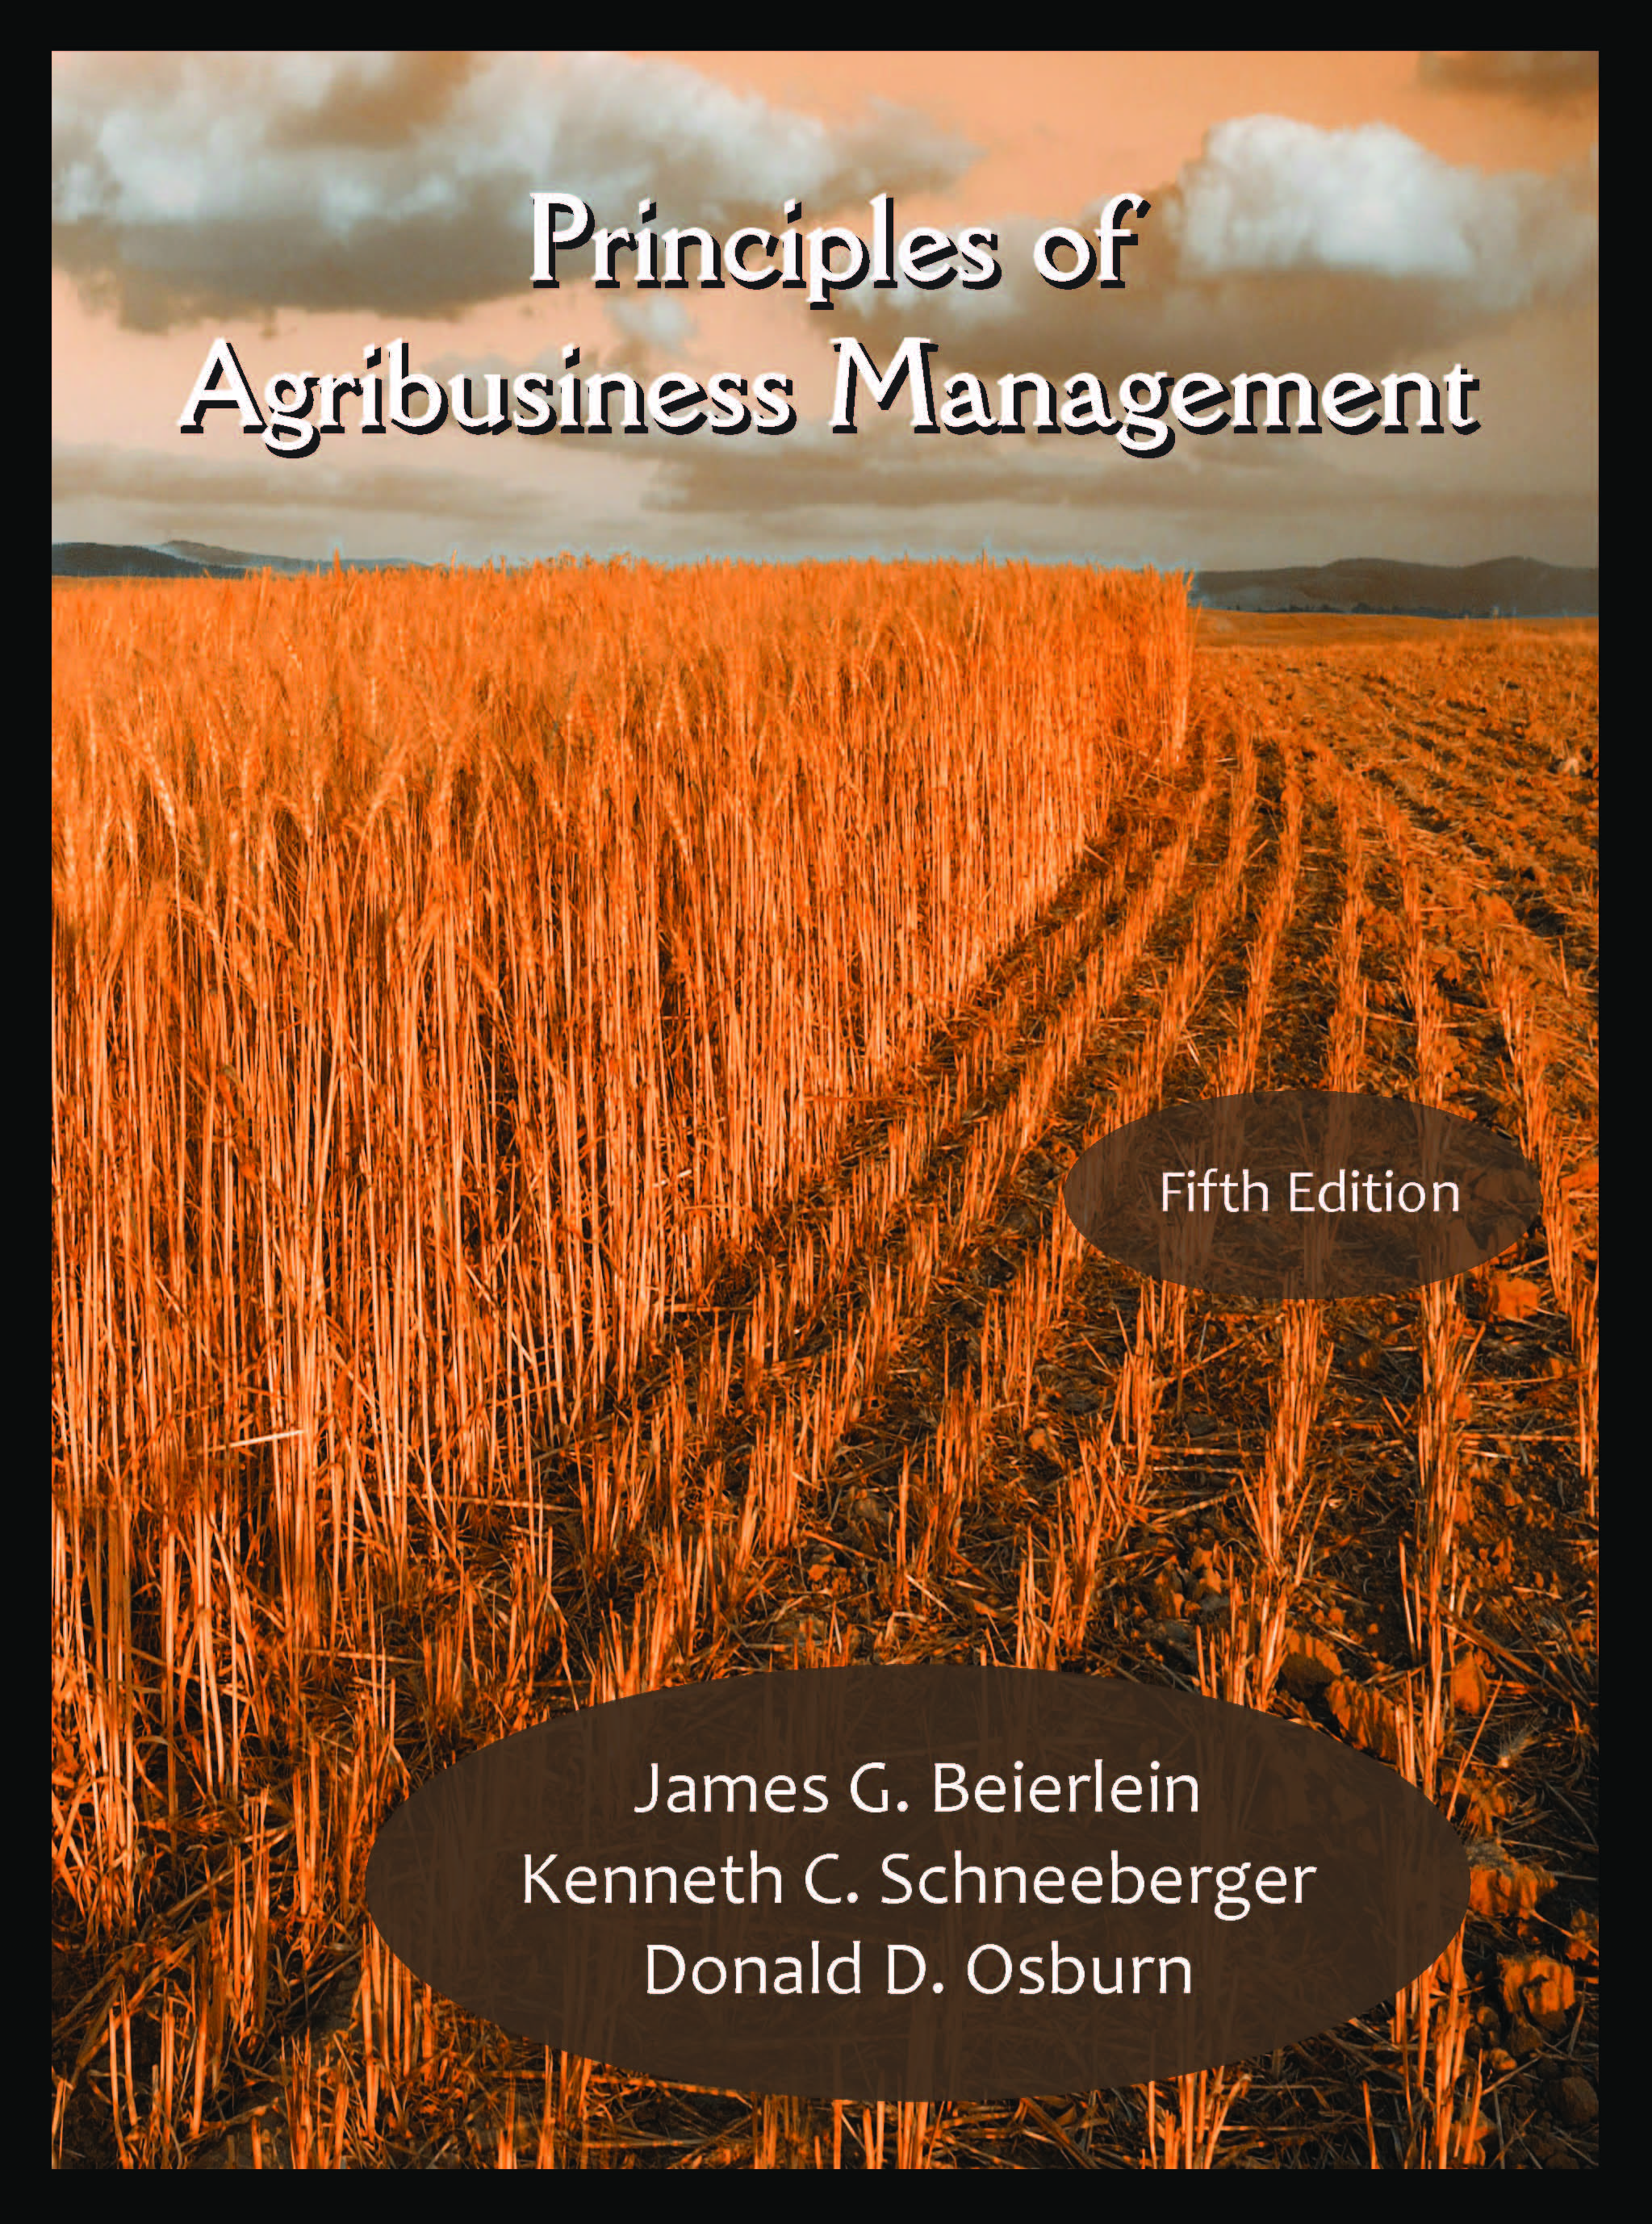 Principles of Agribusiness Management: Fifth Edition by James G. Beierlein, Kenneth C. Schneeberger, Donald D. Osburn